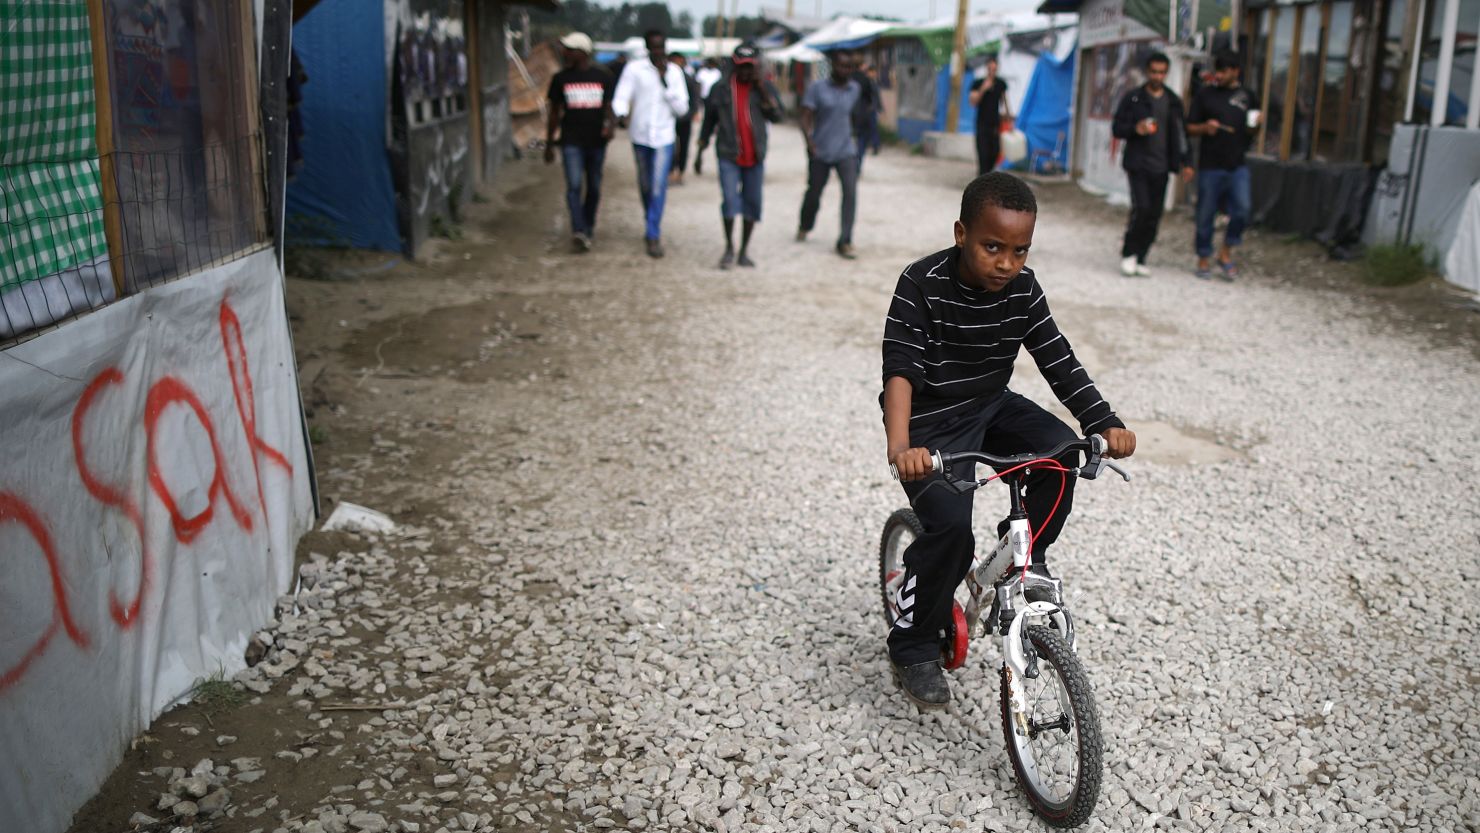 A boy rides his bicycle in the "Jungle" migrant camp in Calais, France.